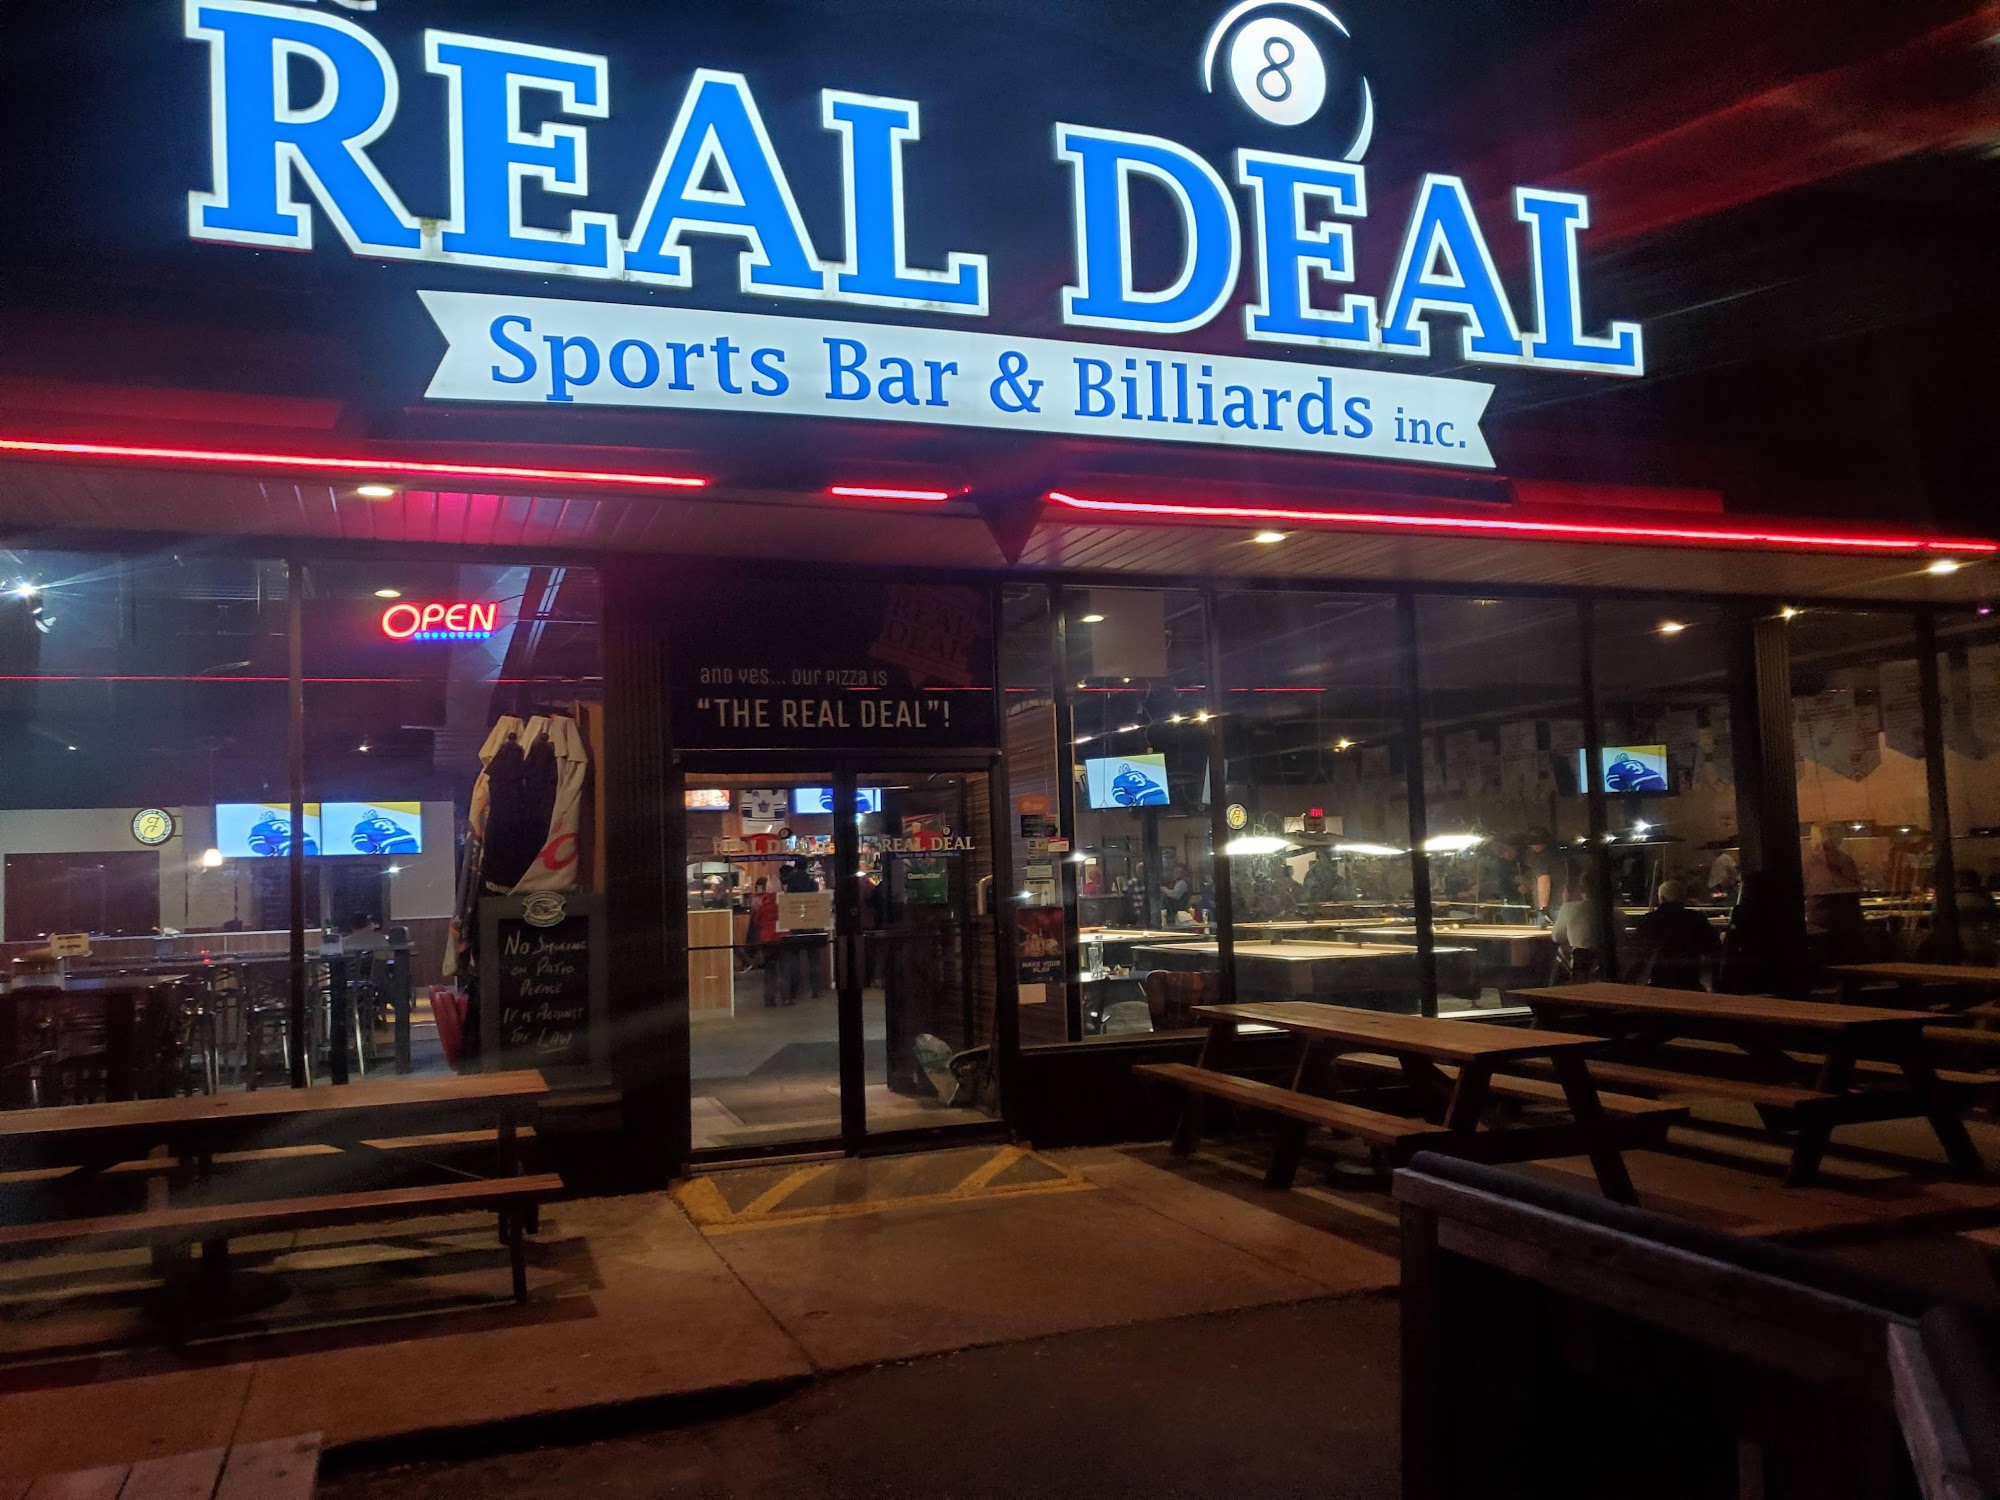 The Real Deal Sports Bar and Billiards Inc.